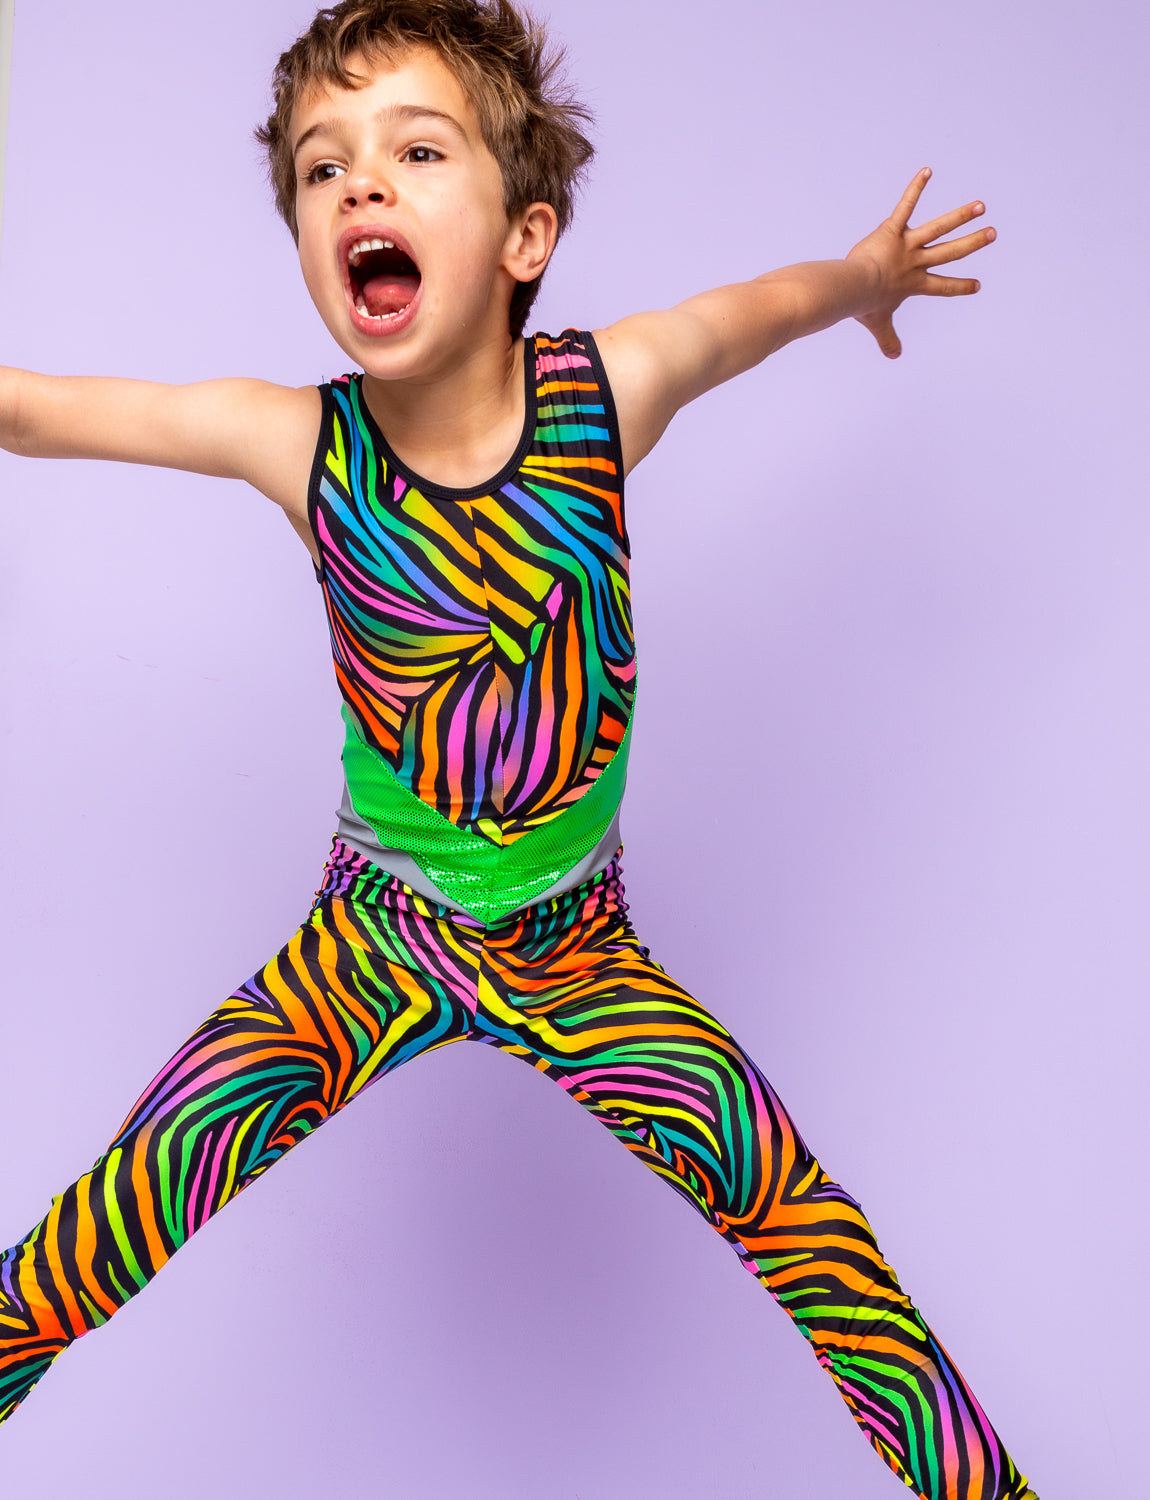 Boy jumping in the air modelling a multi coloured zebra print lycra catsuit.